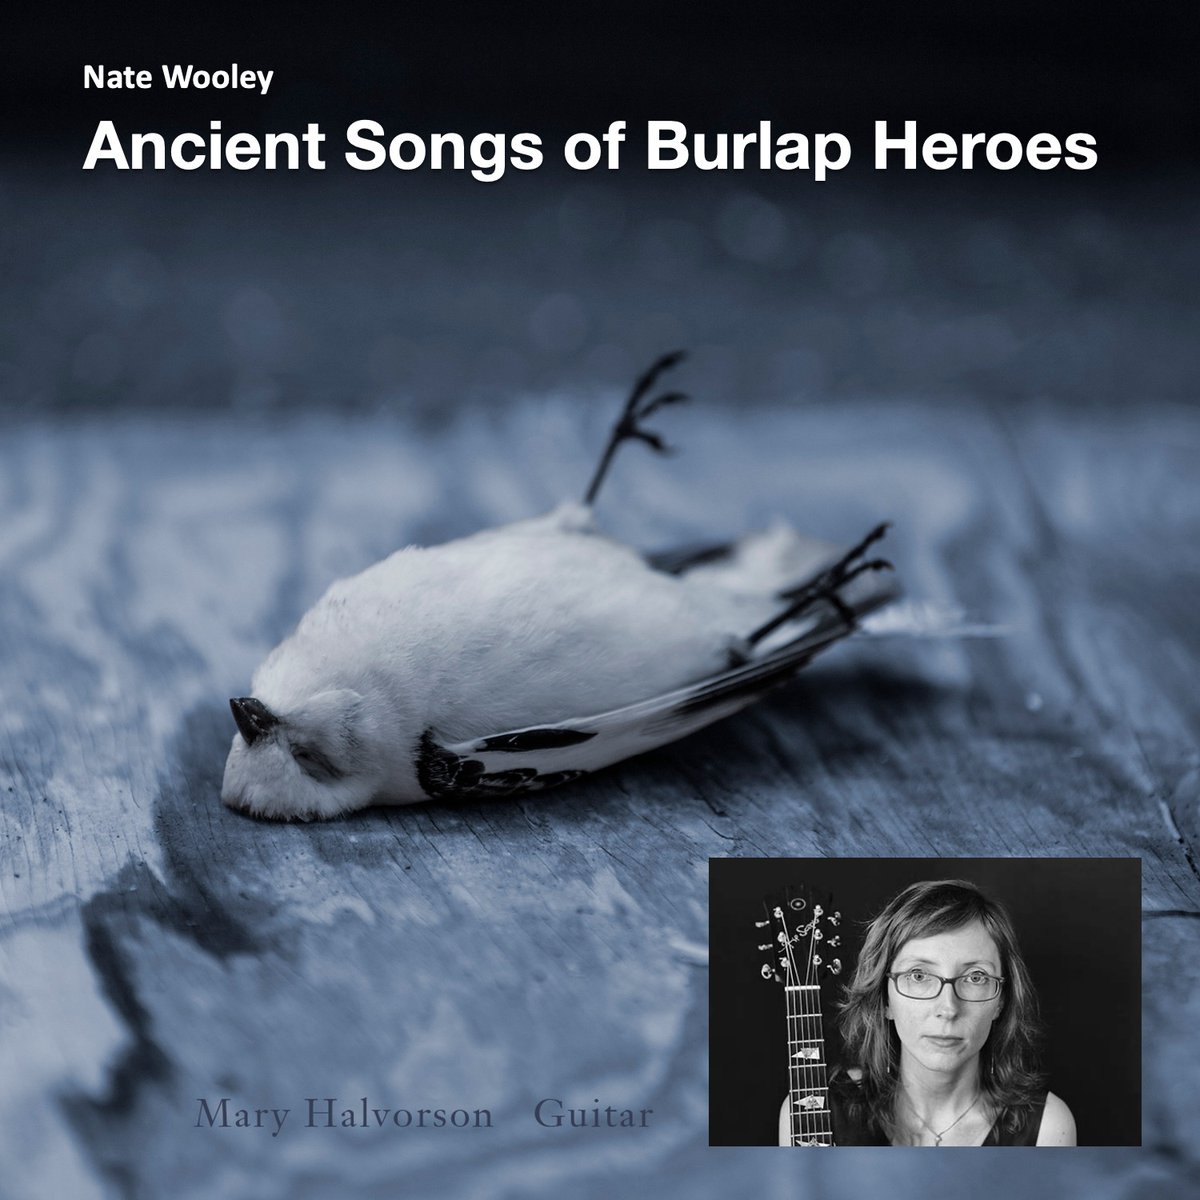 Mary Halvorson plays guitar on “Ancient Songs of Burlap Heroes,” due out July 29, 2022. Pre-order ”Ancient Songs of Burlap Heroes” natewooleypyroclastic.bandcamp.com/album/ancient-…